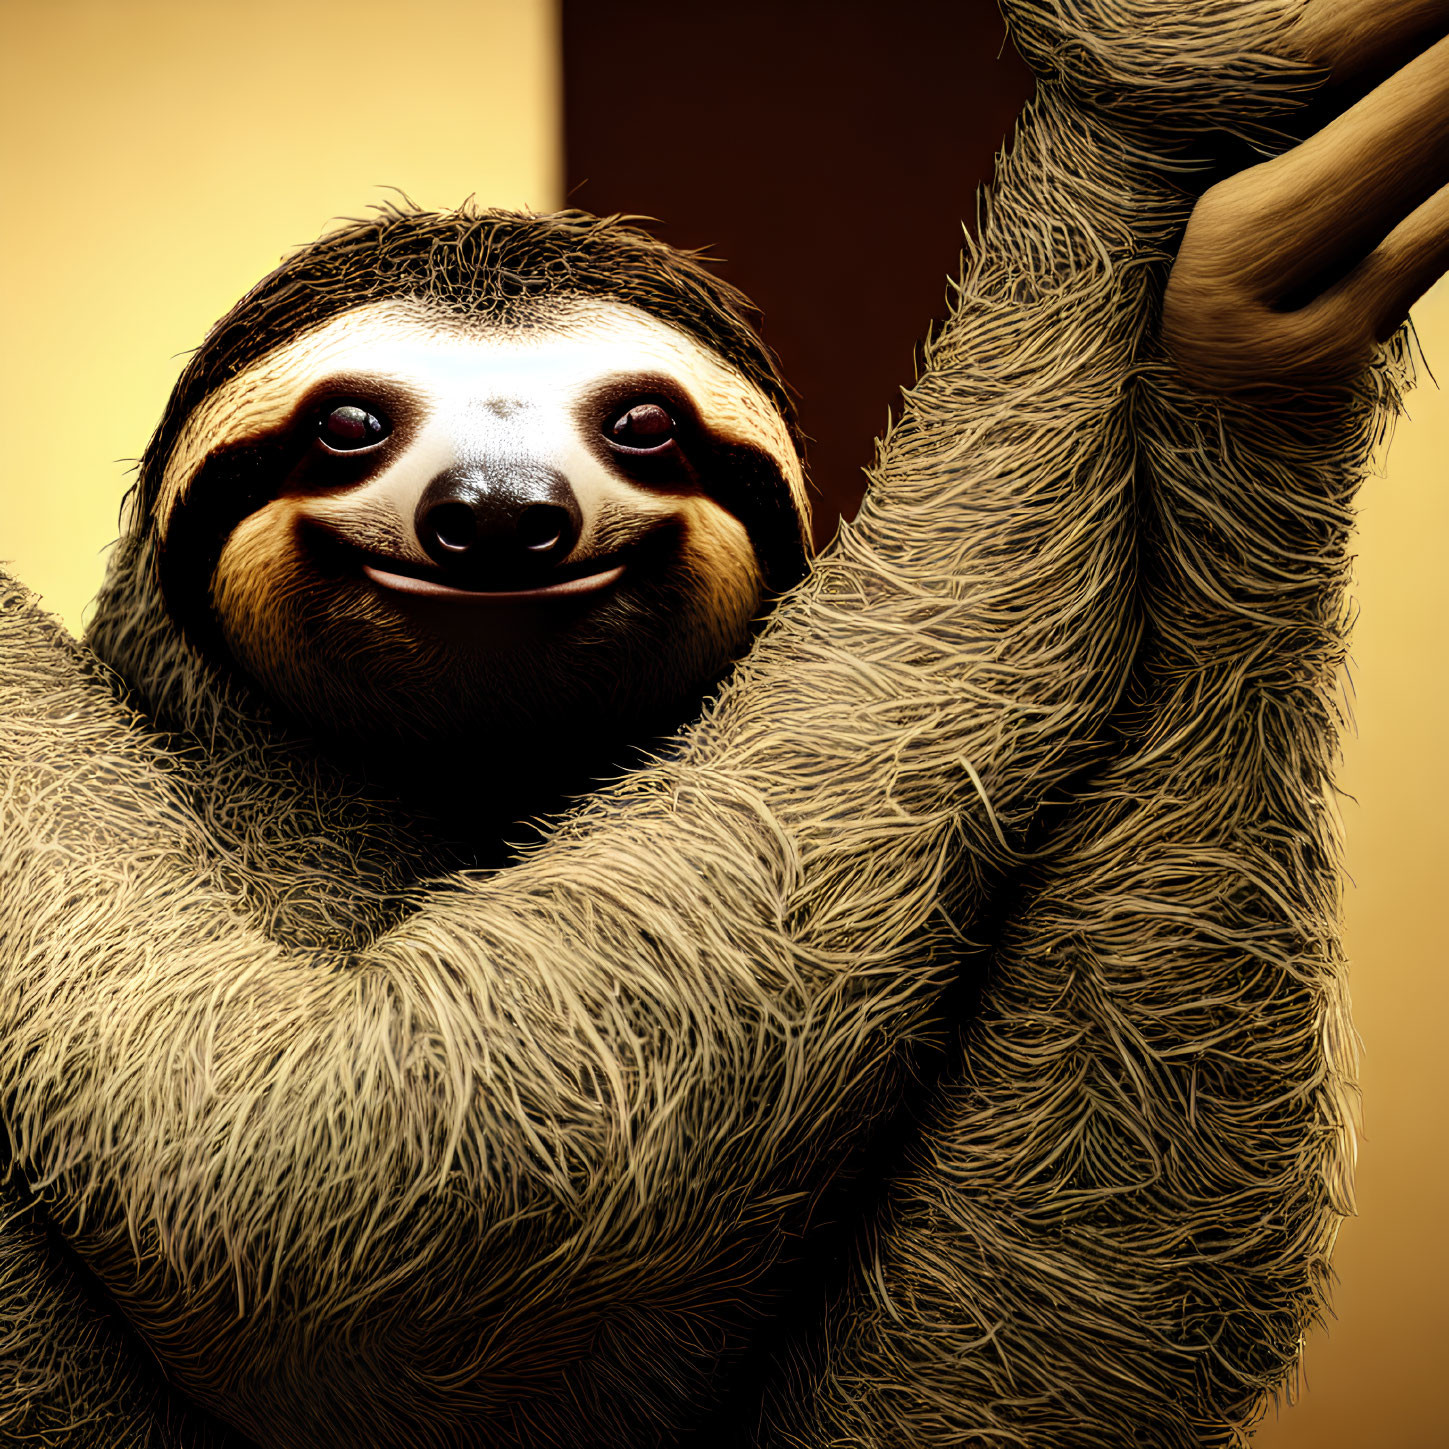 Smiling sloth hanging from a branch with fur textures on yellow background